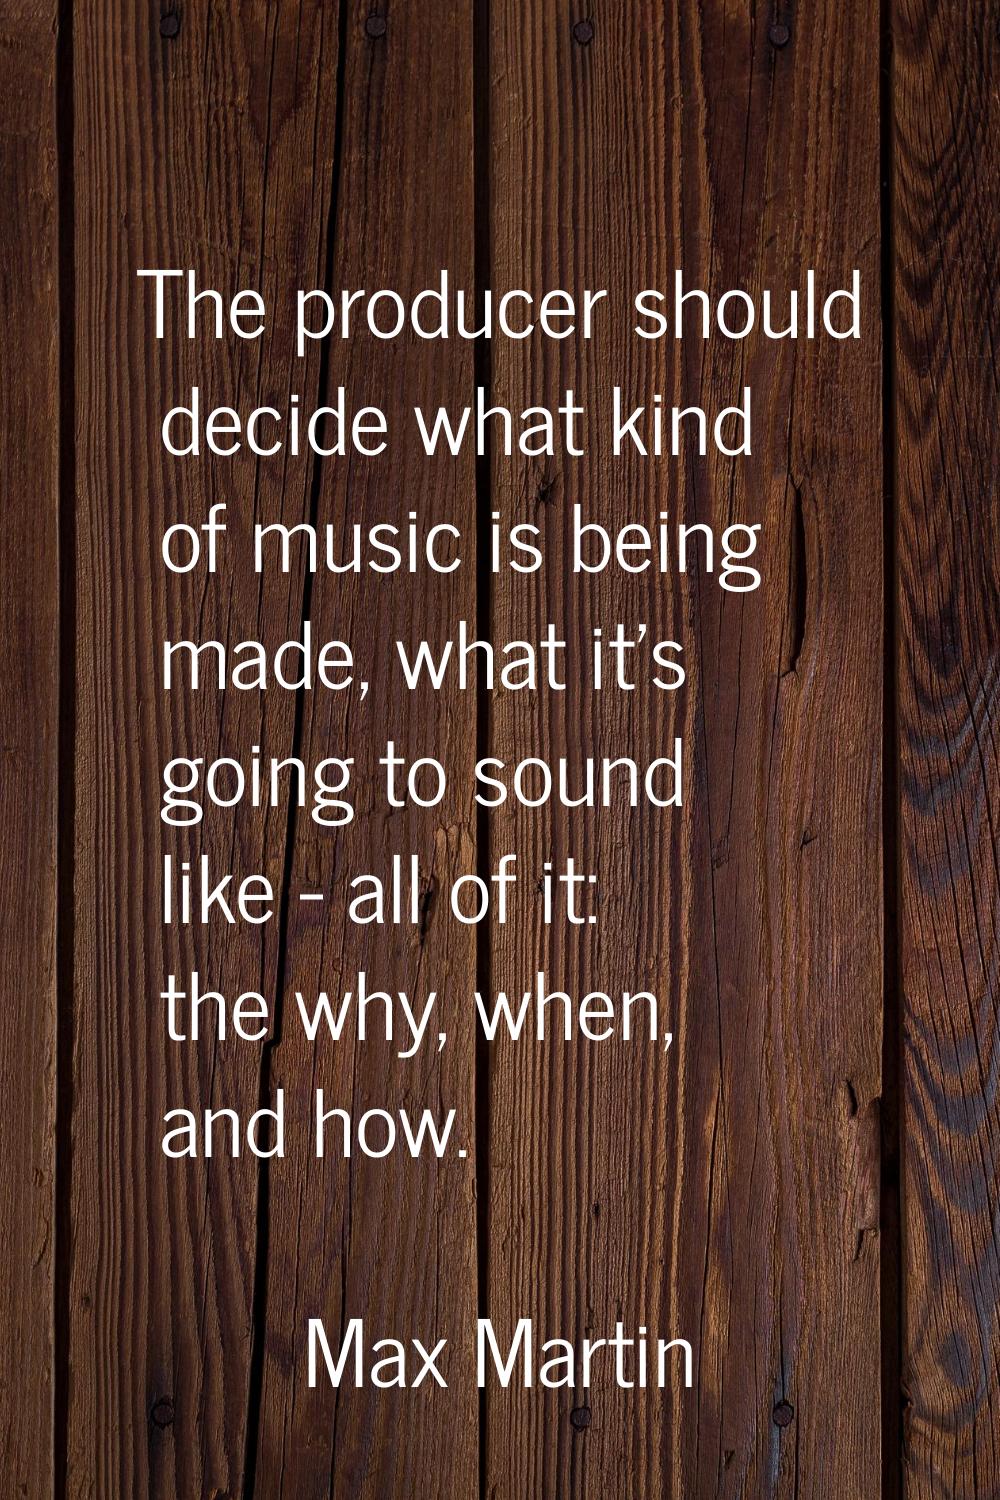 The producer should decide what kind of music is being made, what it's going to sound like - all of